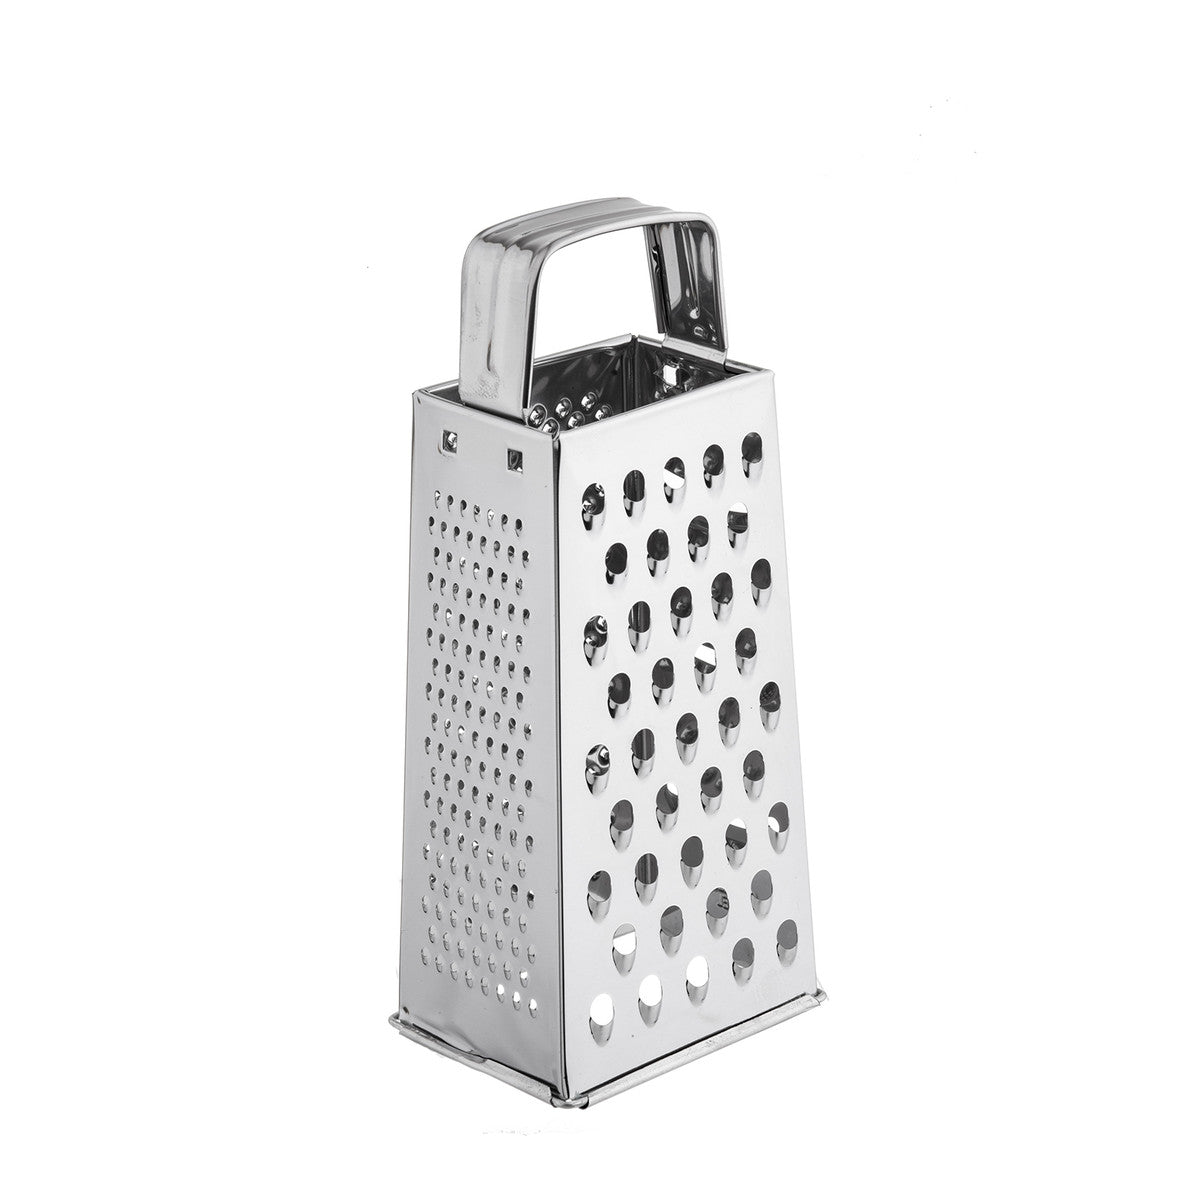 Good Cook Touch Box Grater